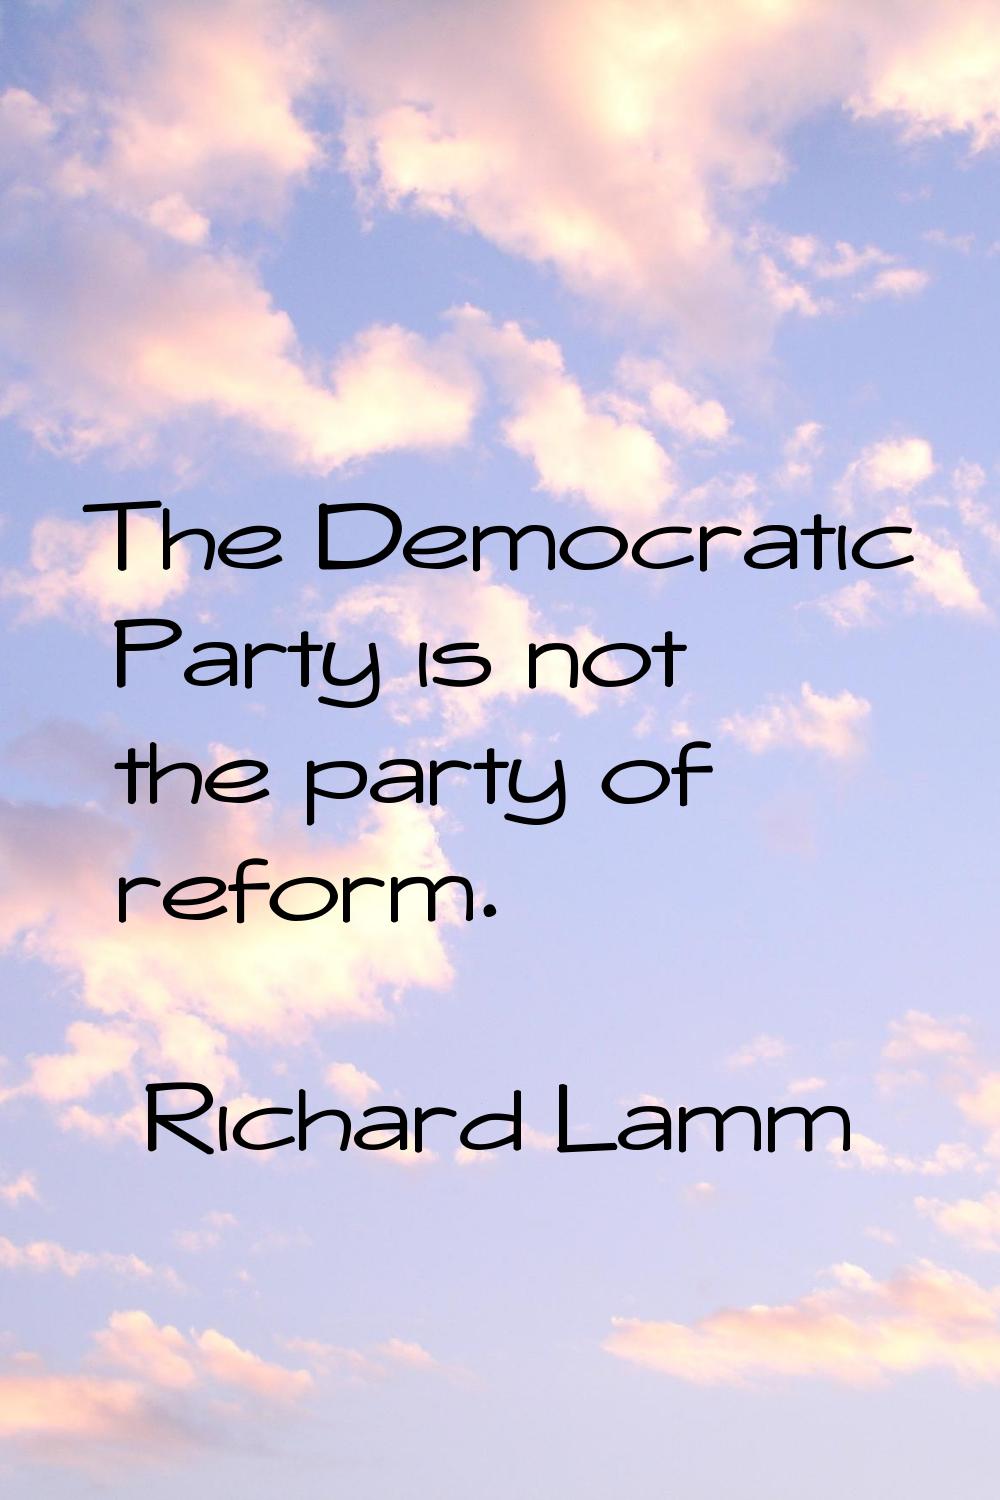 The Democratic Party is not the party of reform.